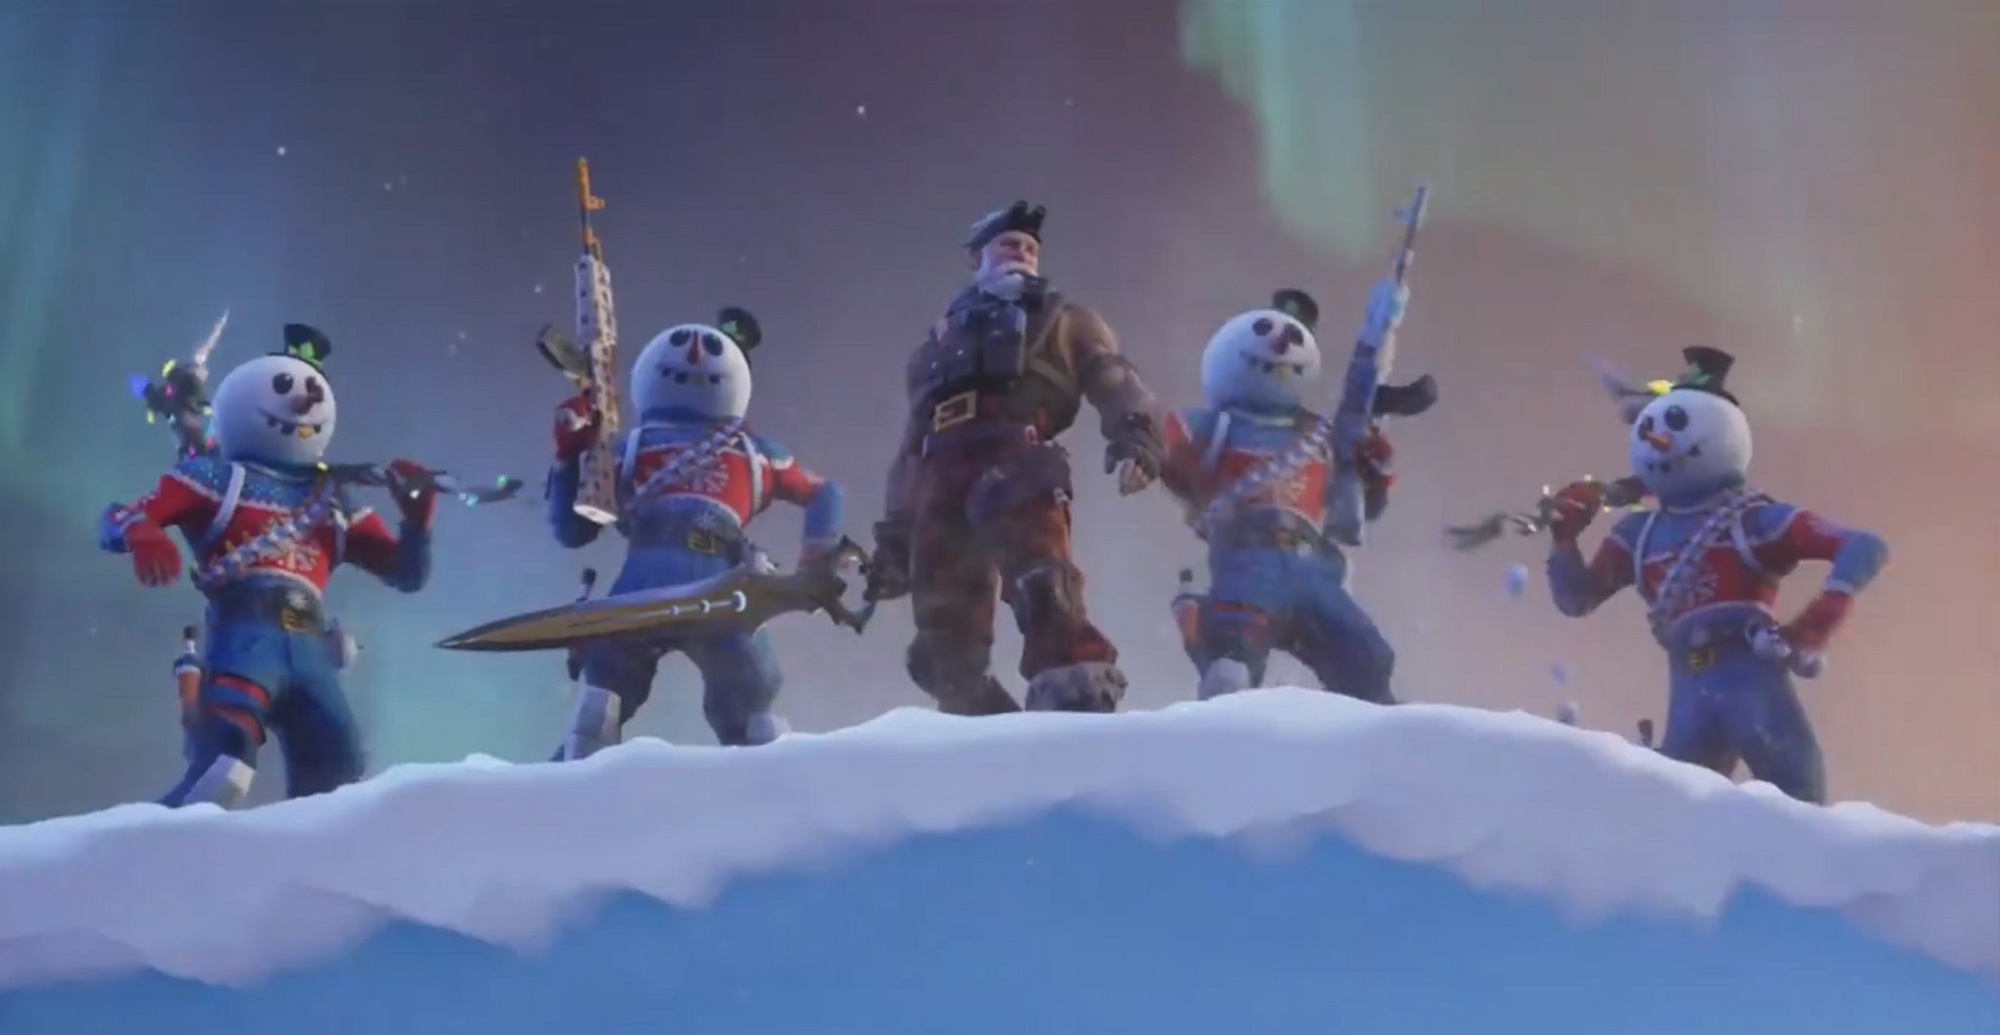 Fortnite Season 7 Official Trailer Hints at Swords, Players Stood On Top of Planes